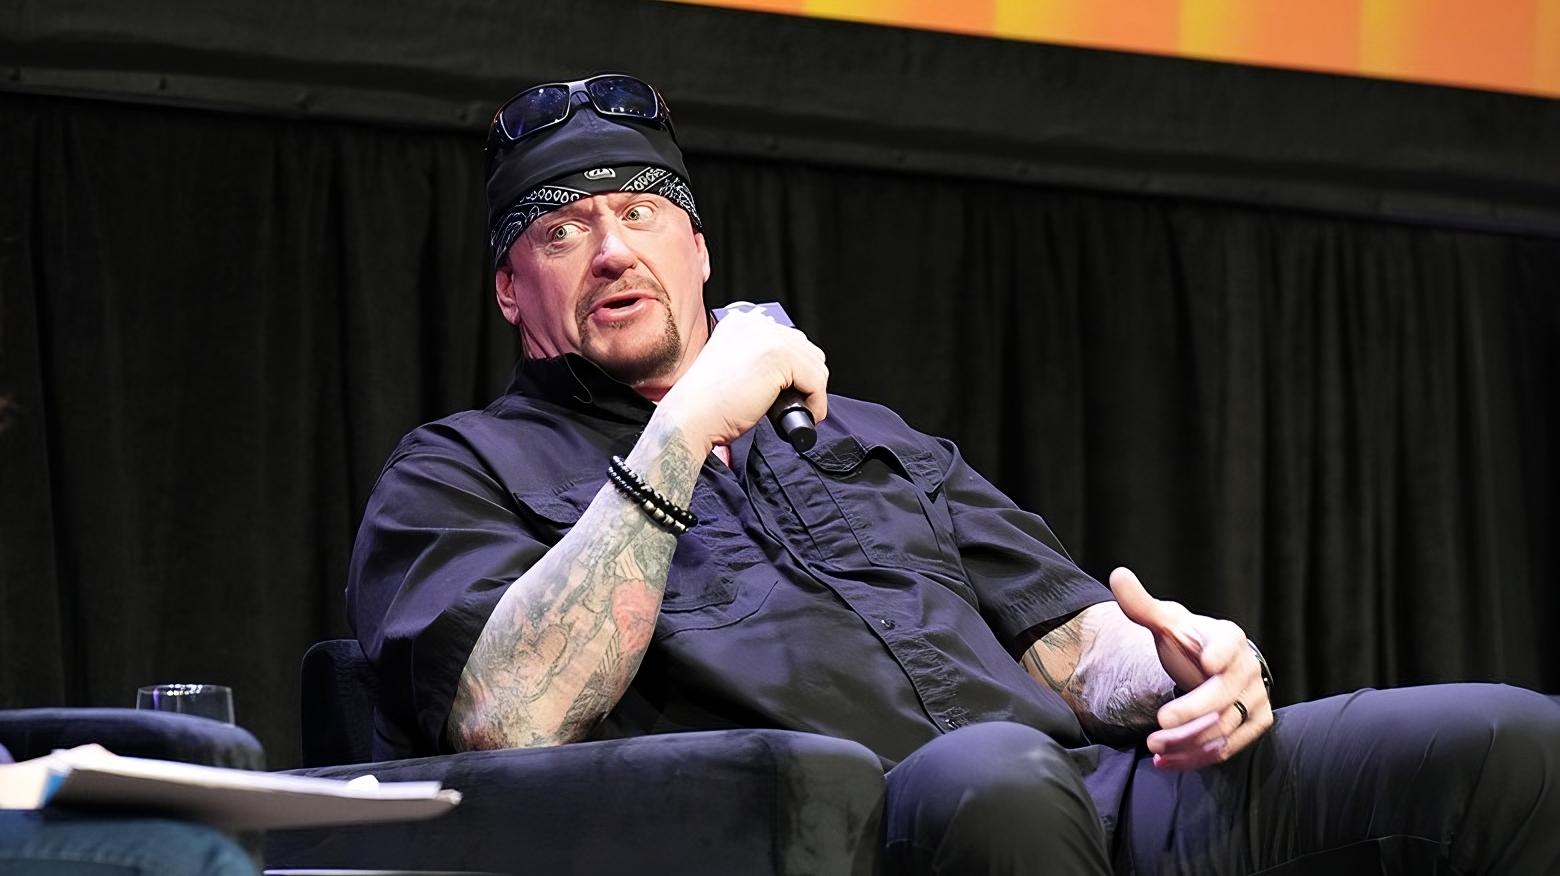 WWE Legend The Undertaker Addresses Being The Subject Of A Tom Brady-Style Roast